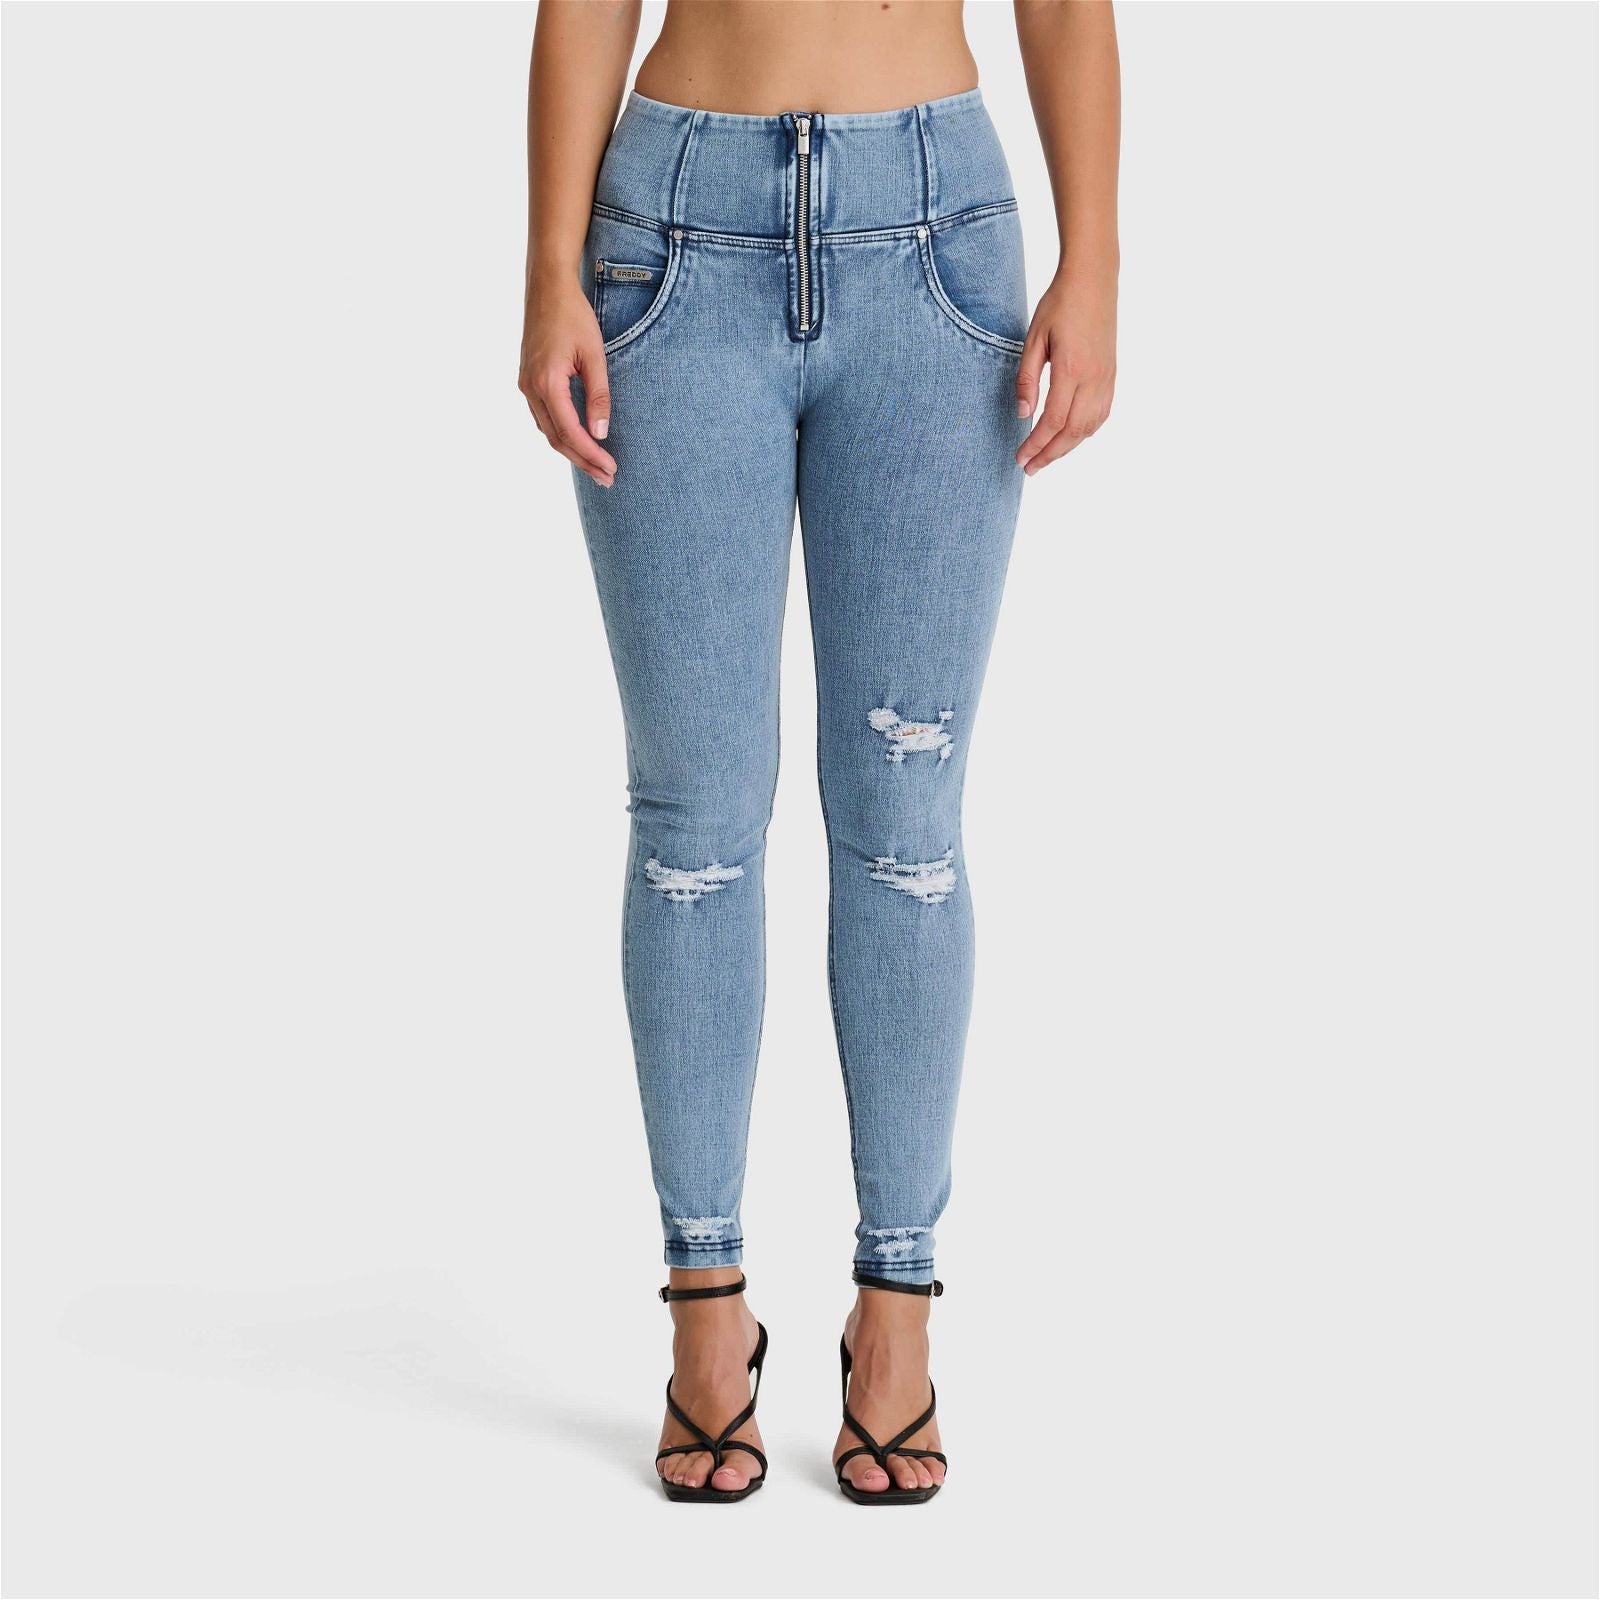 WR.UP® SNUG Distressed Jeans - High Waisted - Full Length - Light Blue + Blue Stitching 1